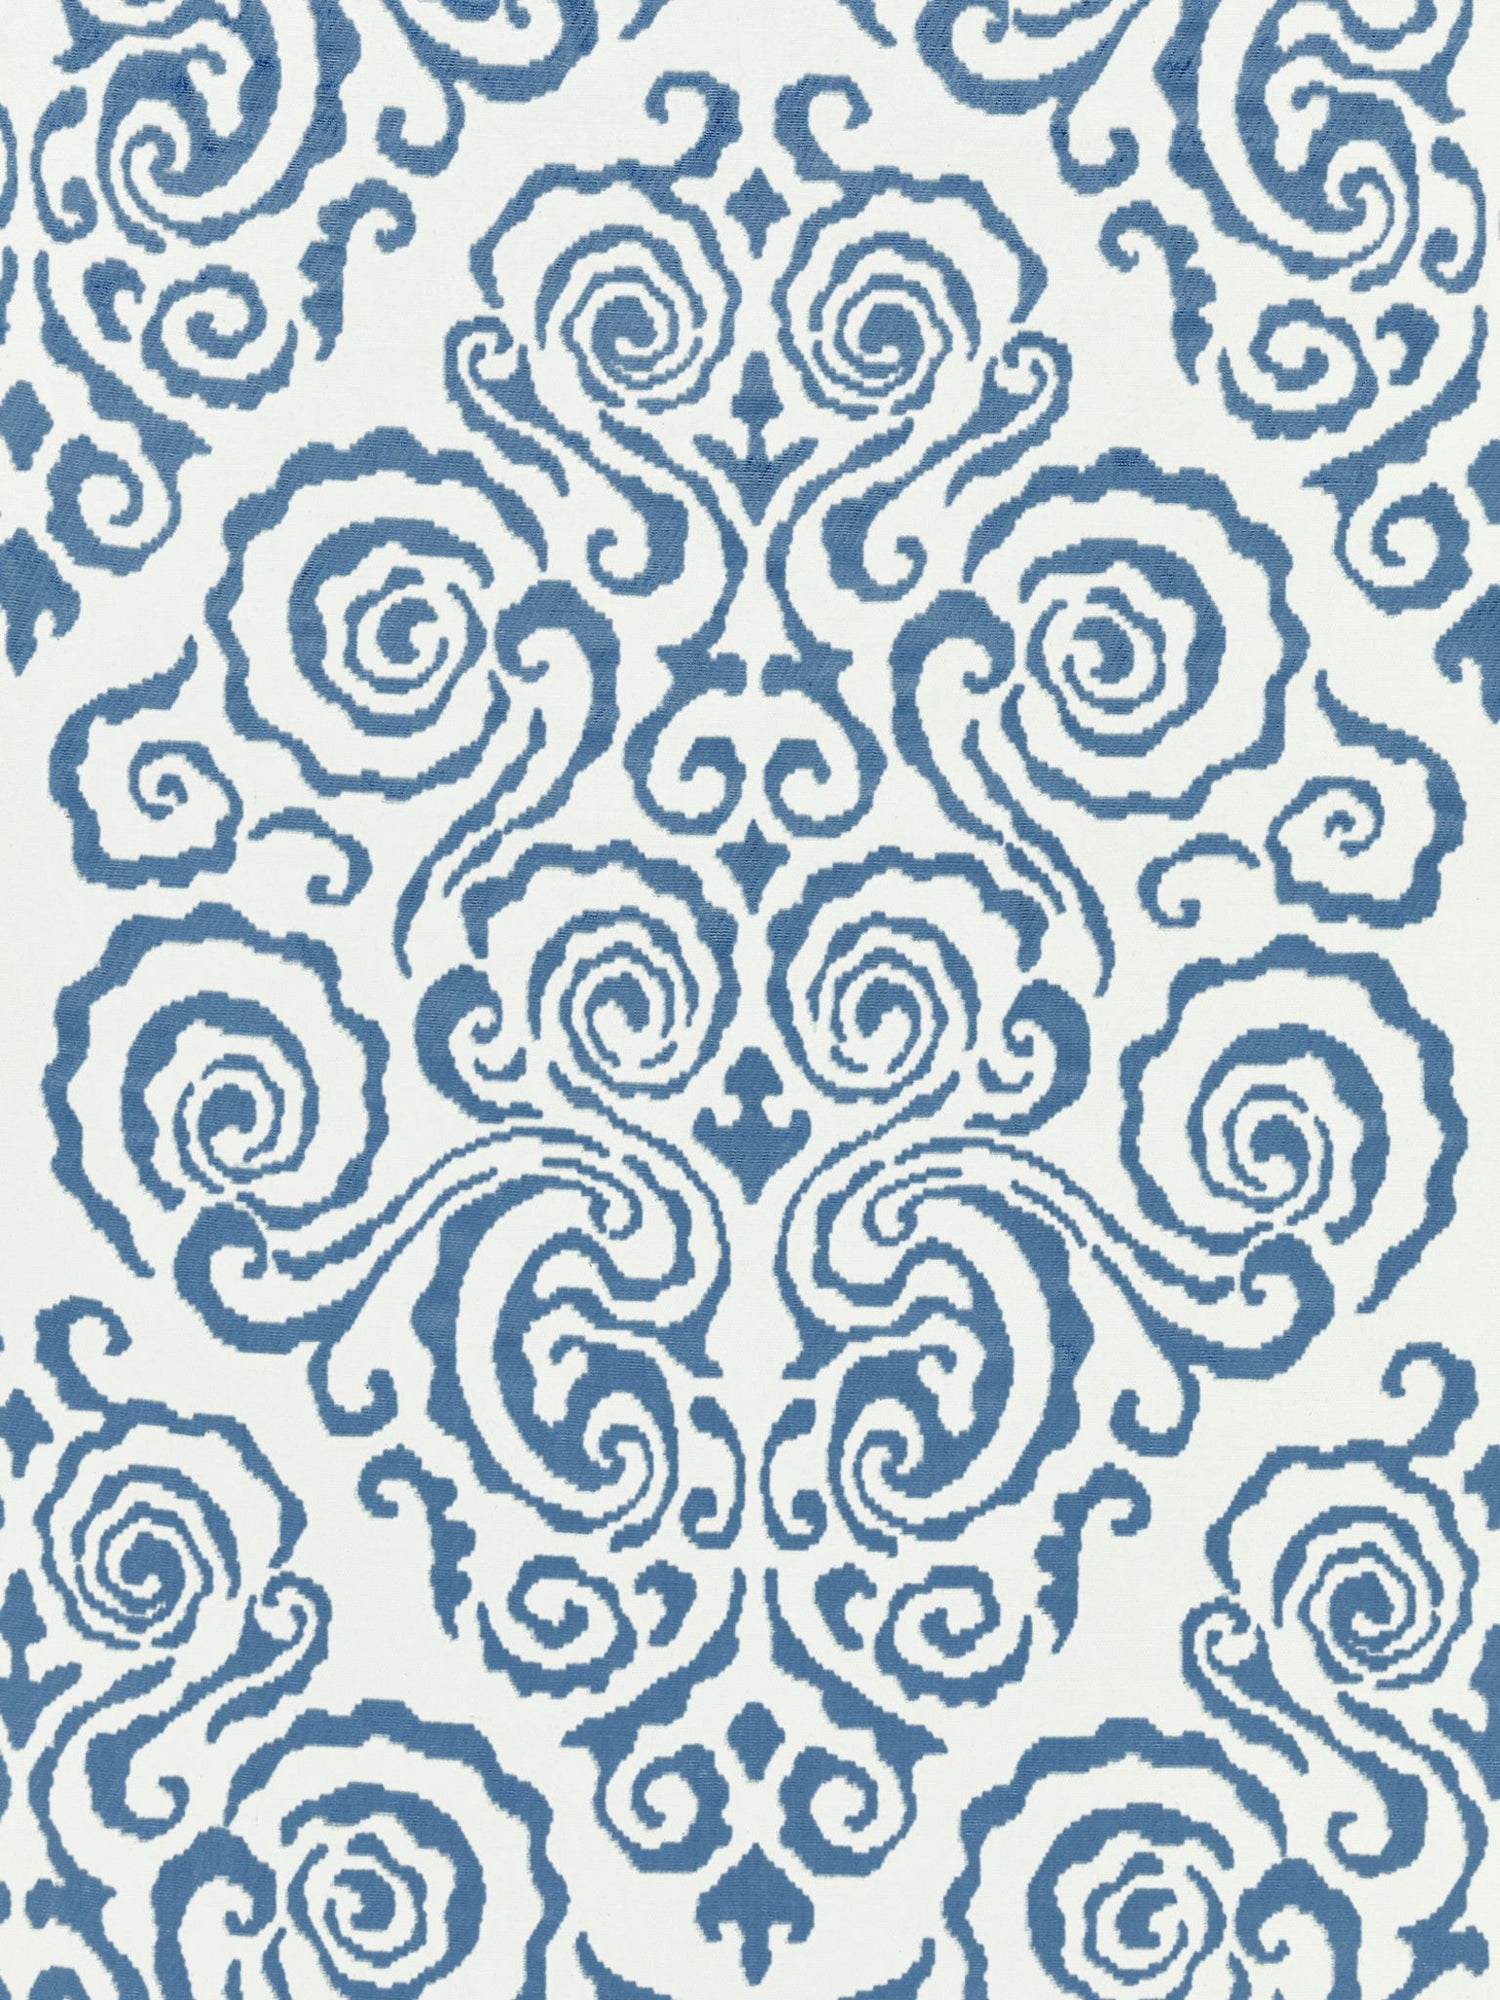 Cirrus Velvet Damask fabric in morning glory color - pattern number SC 000227219 - by Scalamandre in the Scalamandre Fabrics Book 1 collection